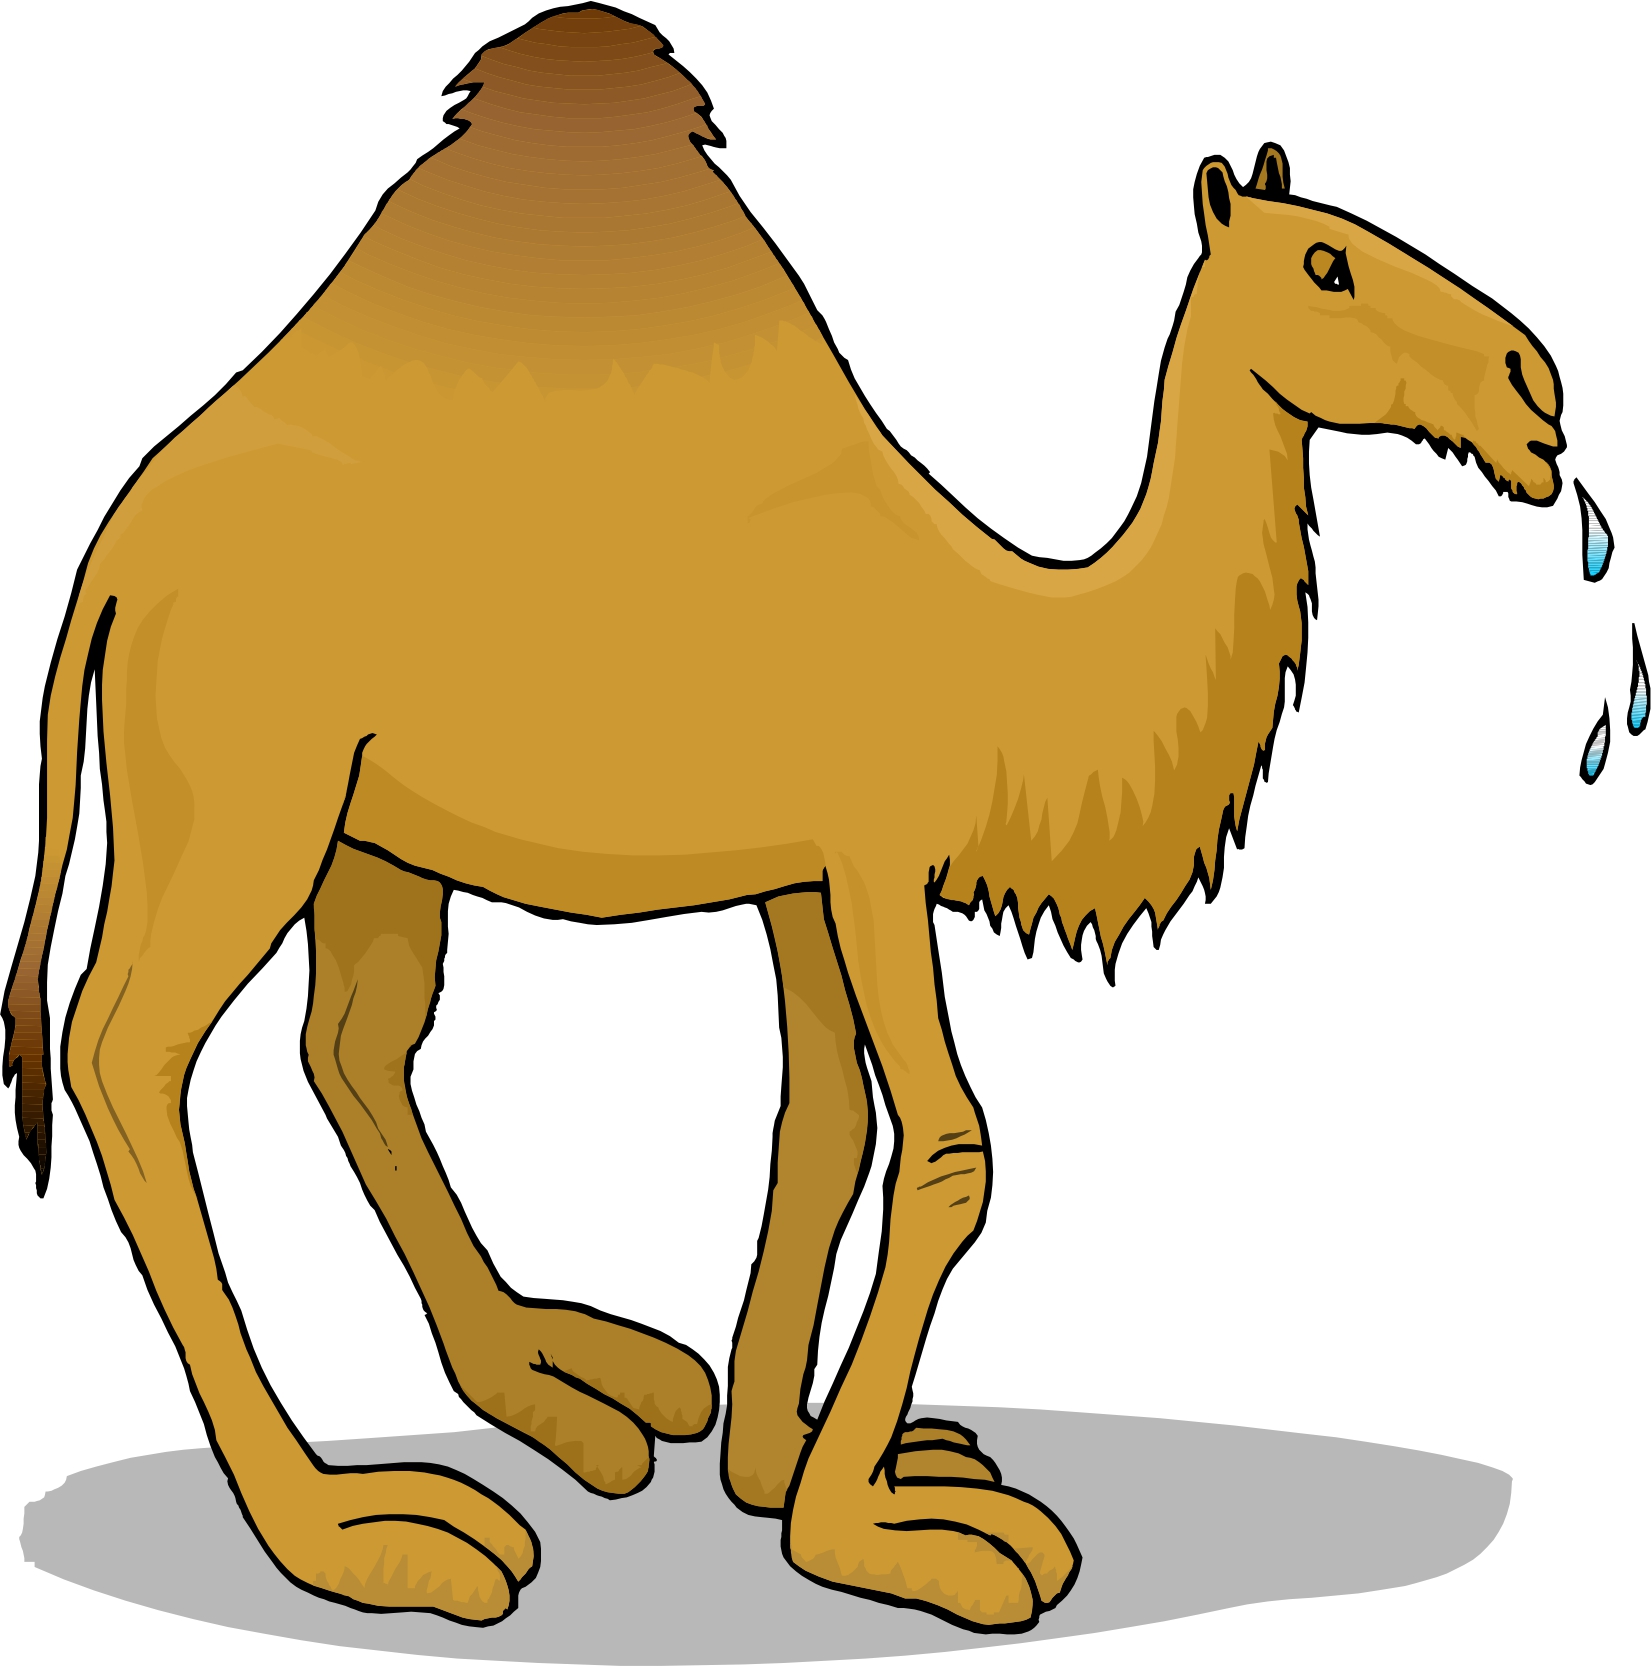 10 Camel Cartoon Images   Free Cliparts That You Can Download To You    